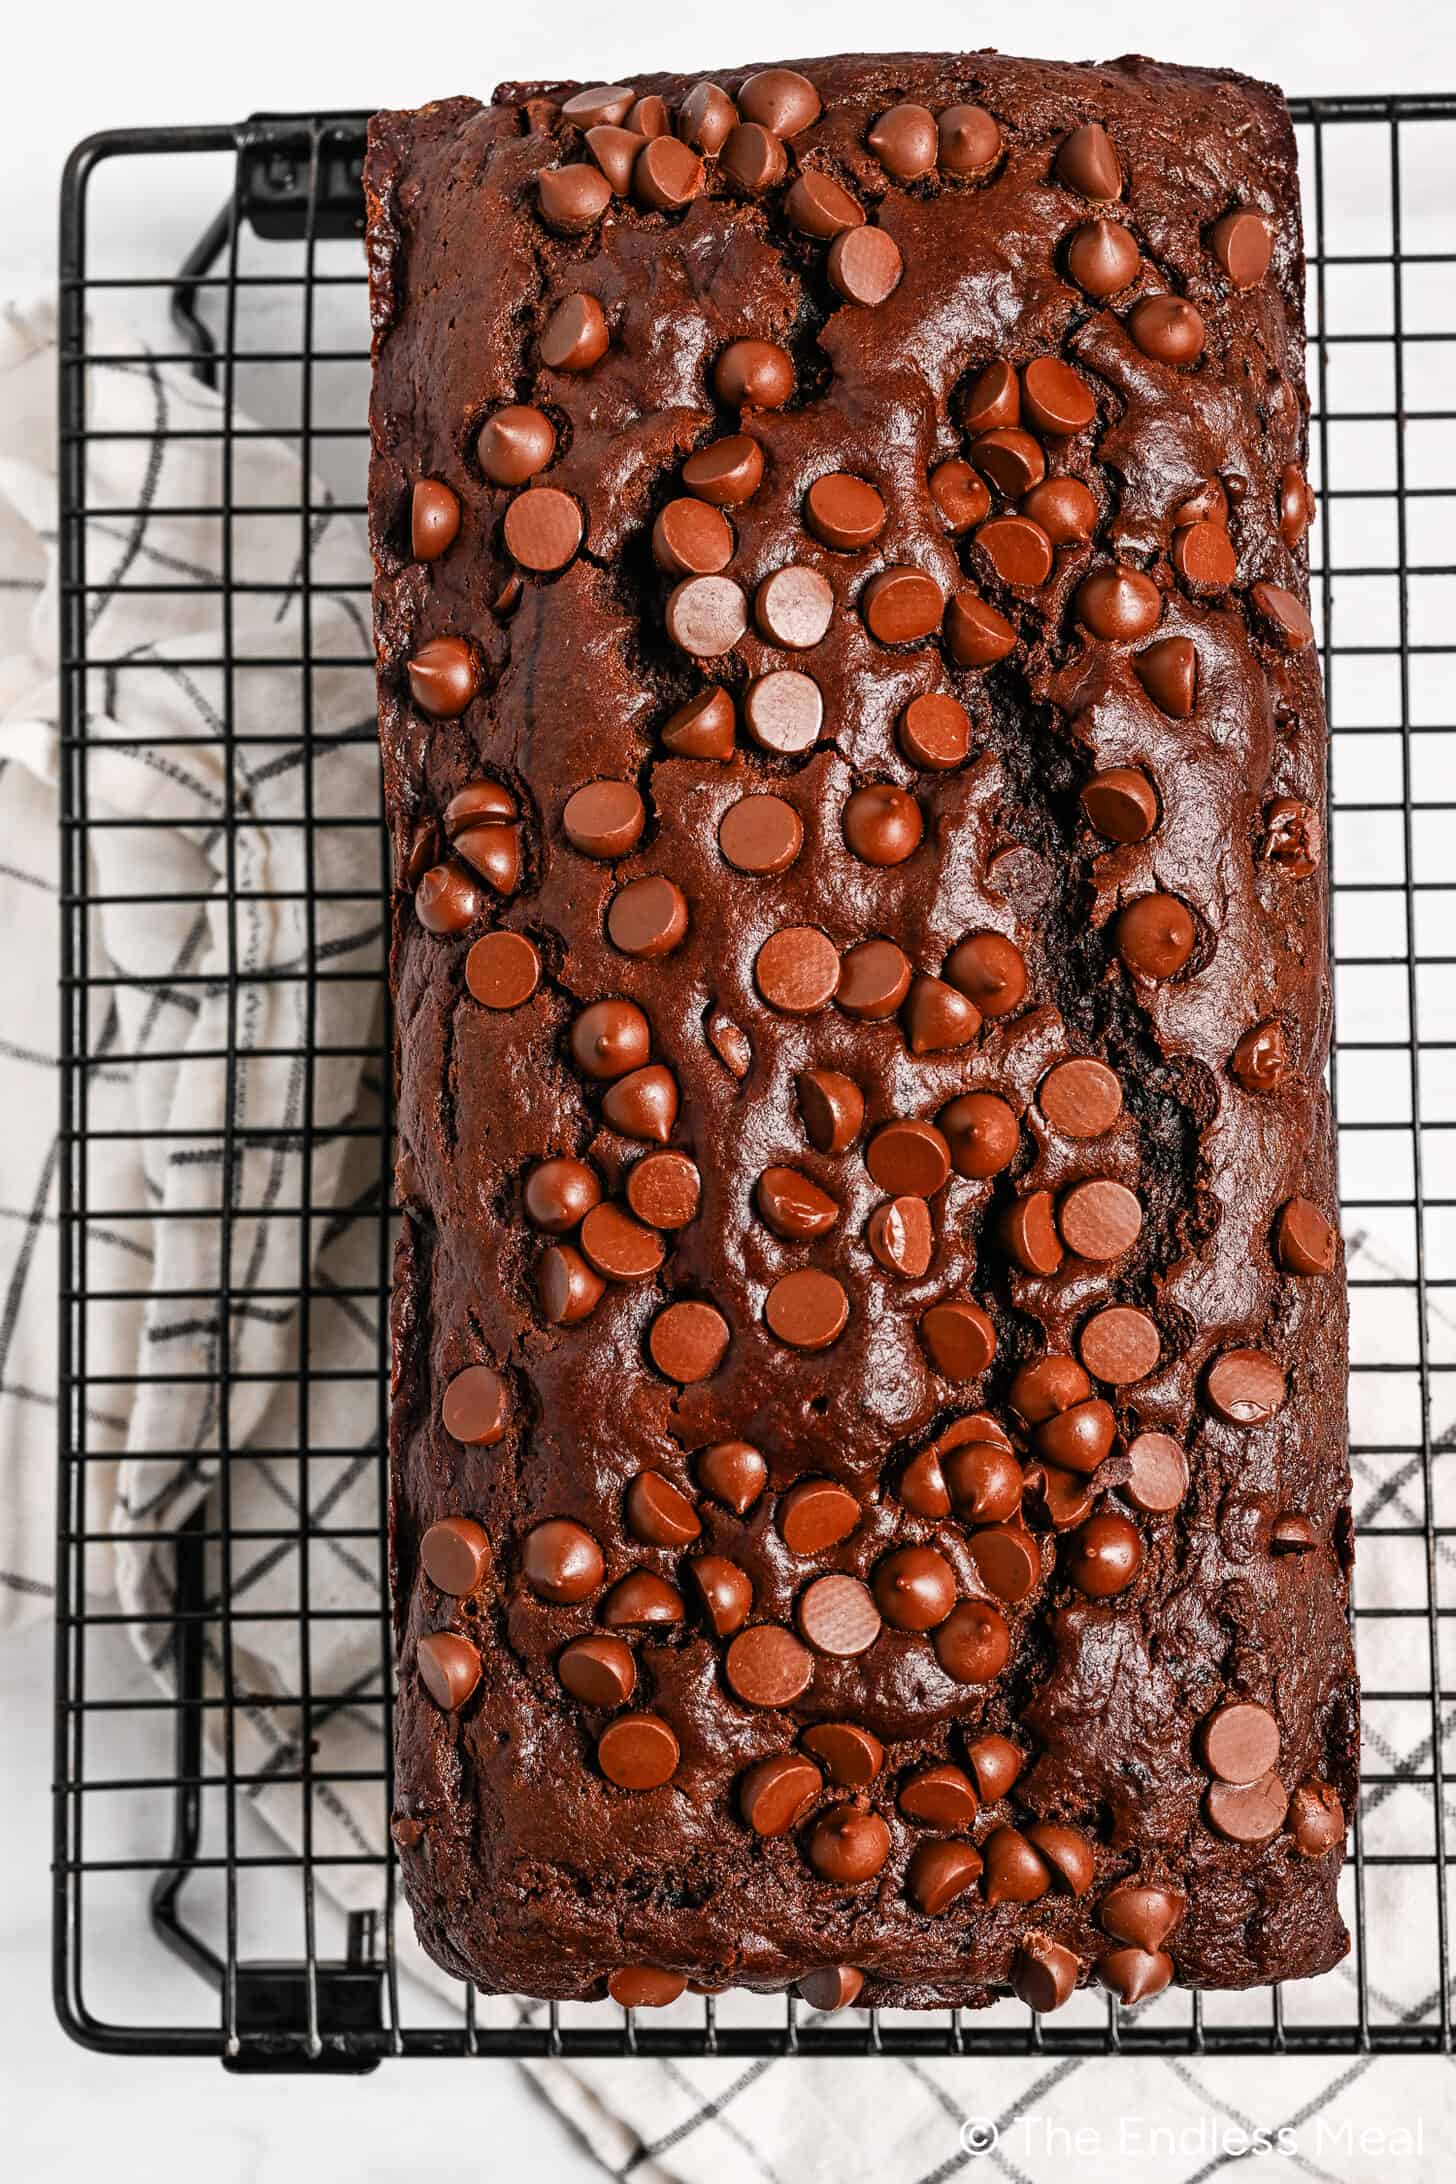 Looking down on a loaf of Chocolate Bread